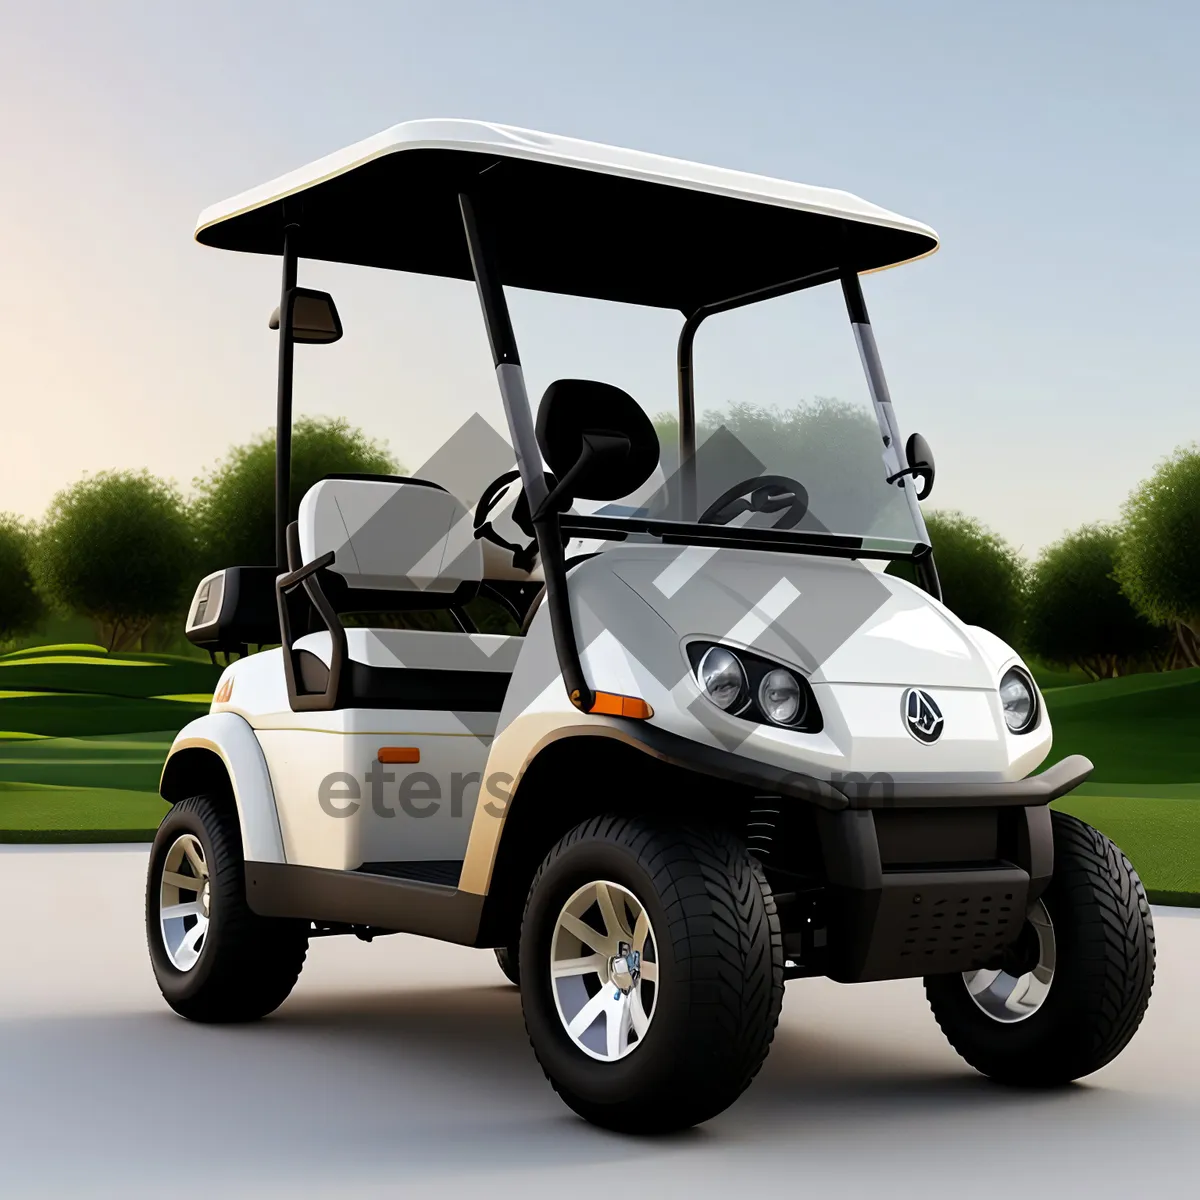 Picture of Golf Cart: Sporty Vehicle for Easy Transportation on the Green